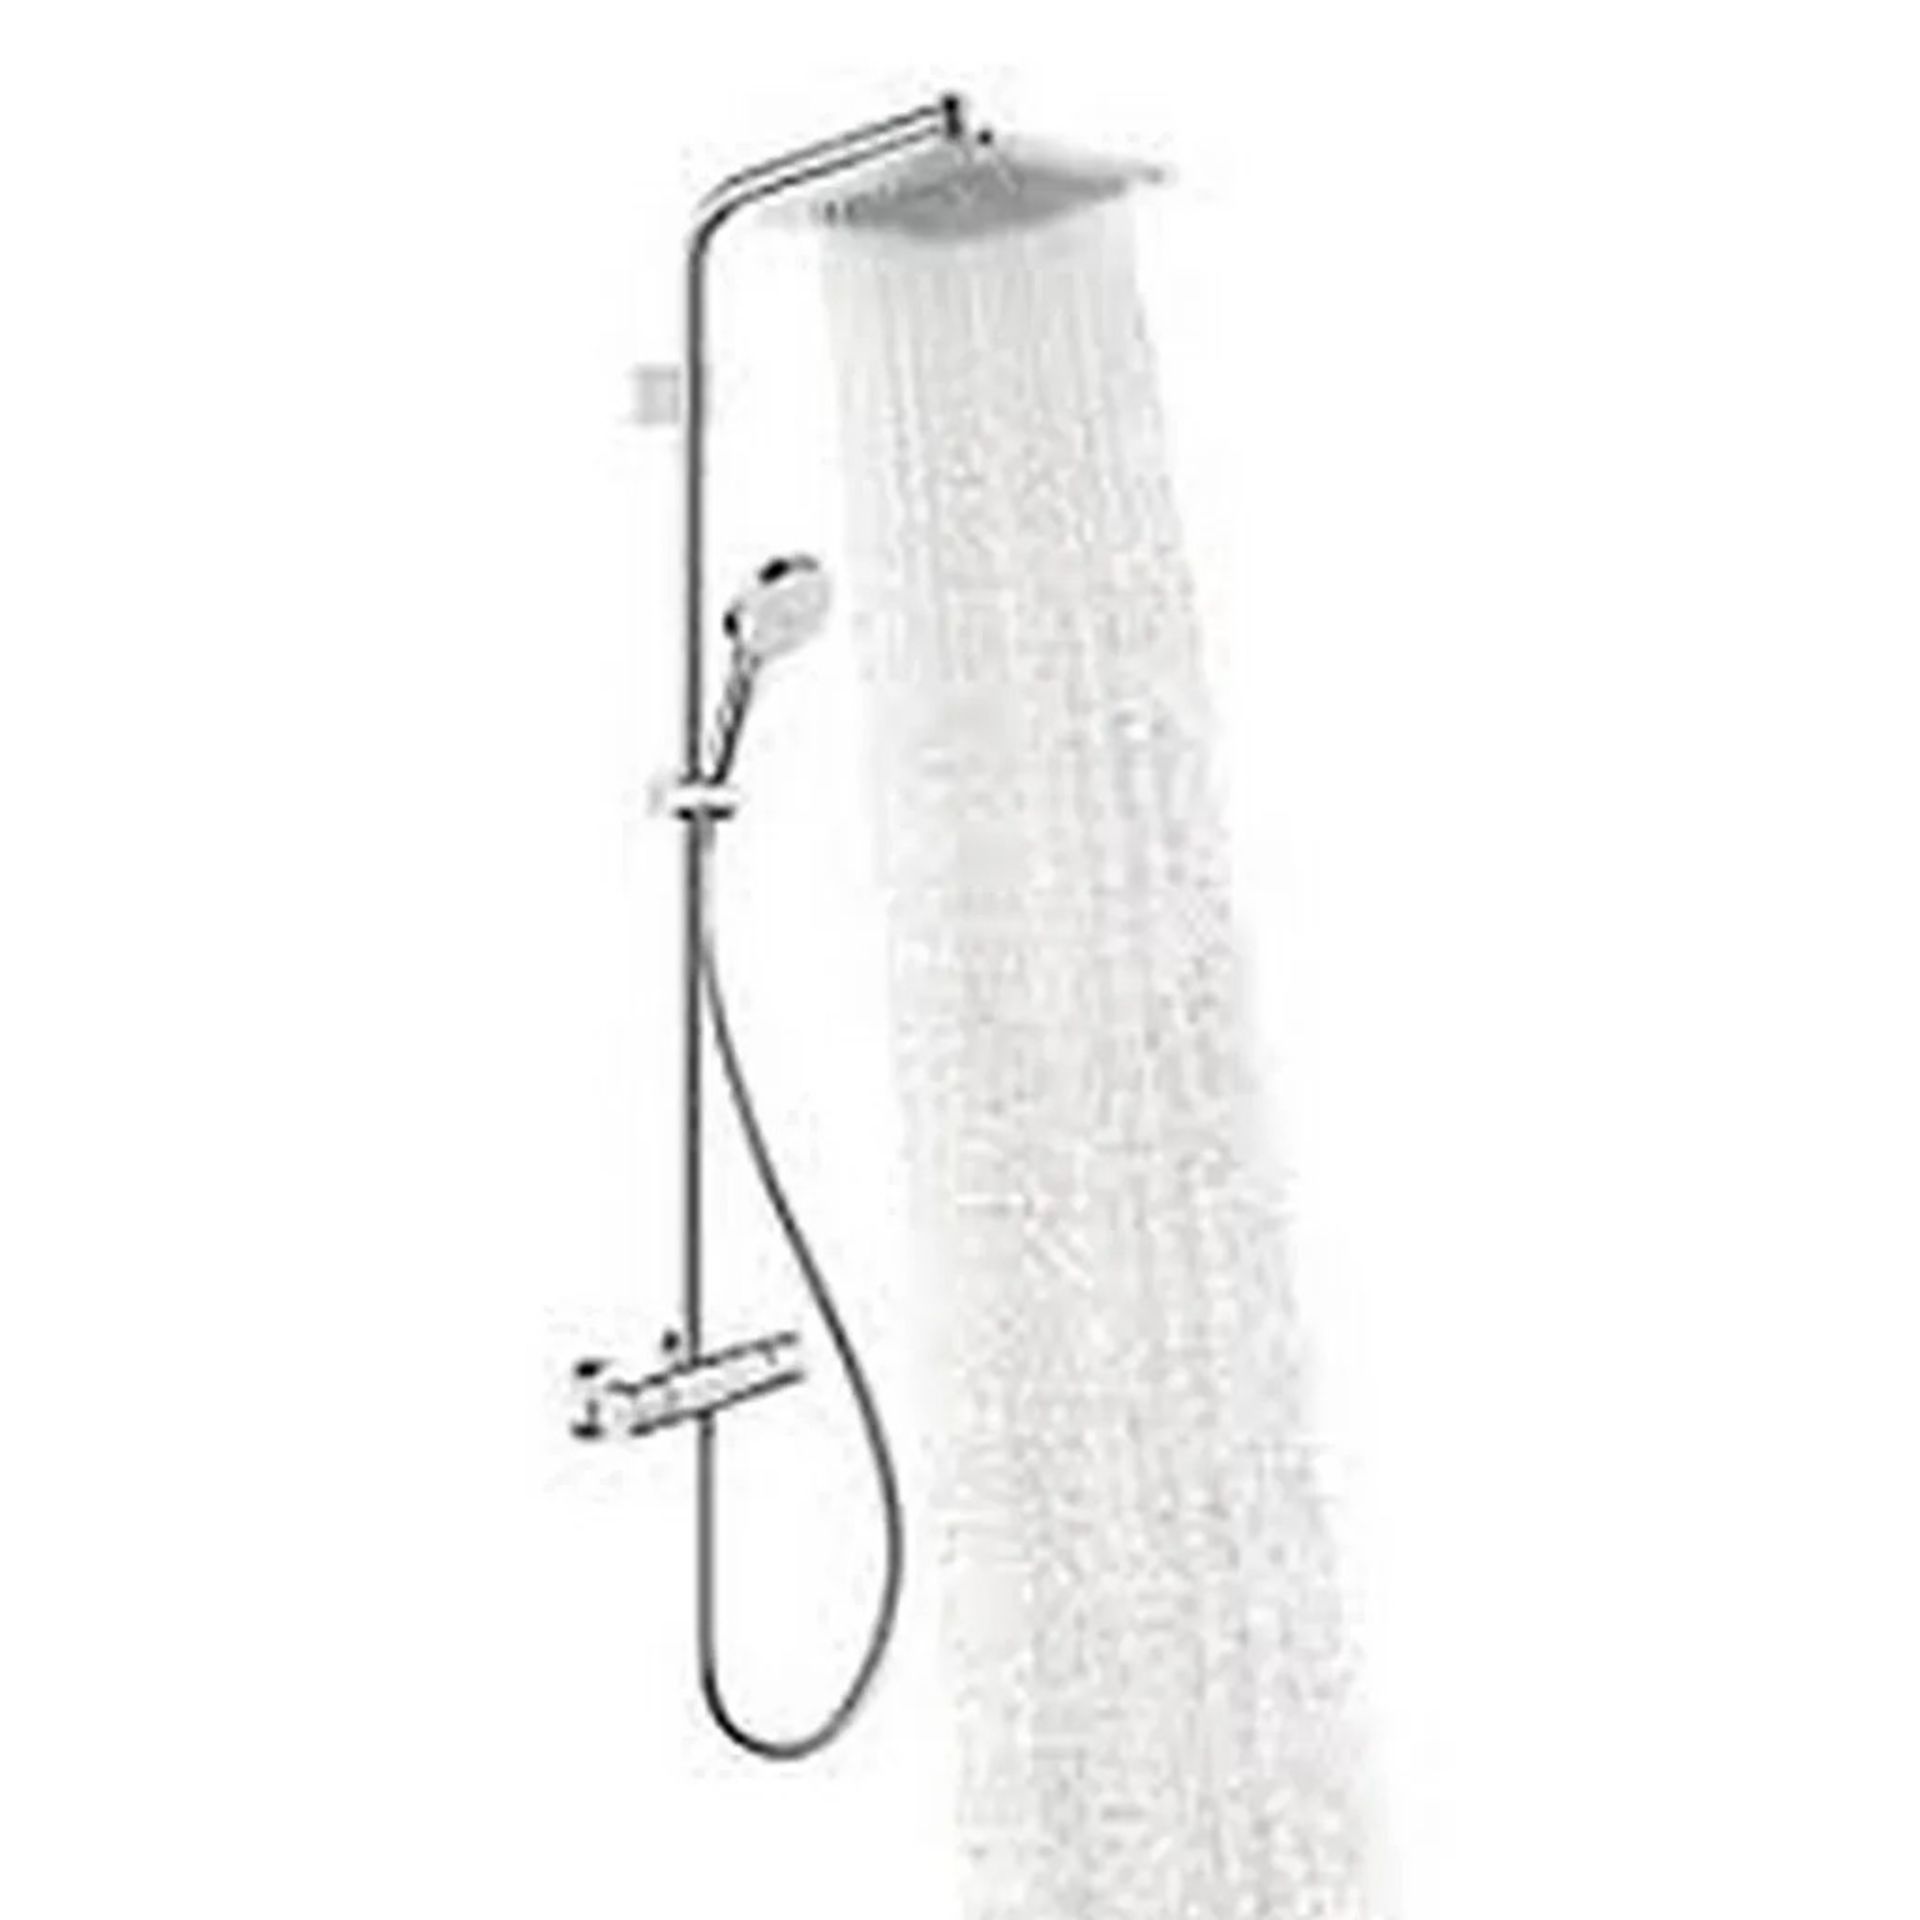 HANSGROHE CROMETTA E HP REAR-FED EXPOSED CHROME THERMOSTATIC MIXER SHOWER - ER52